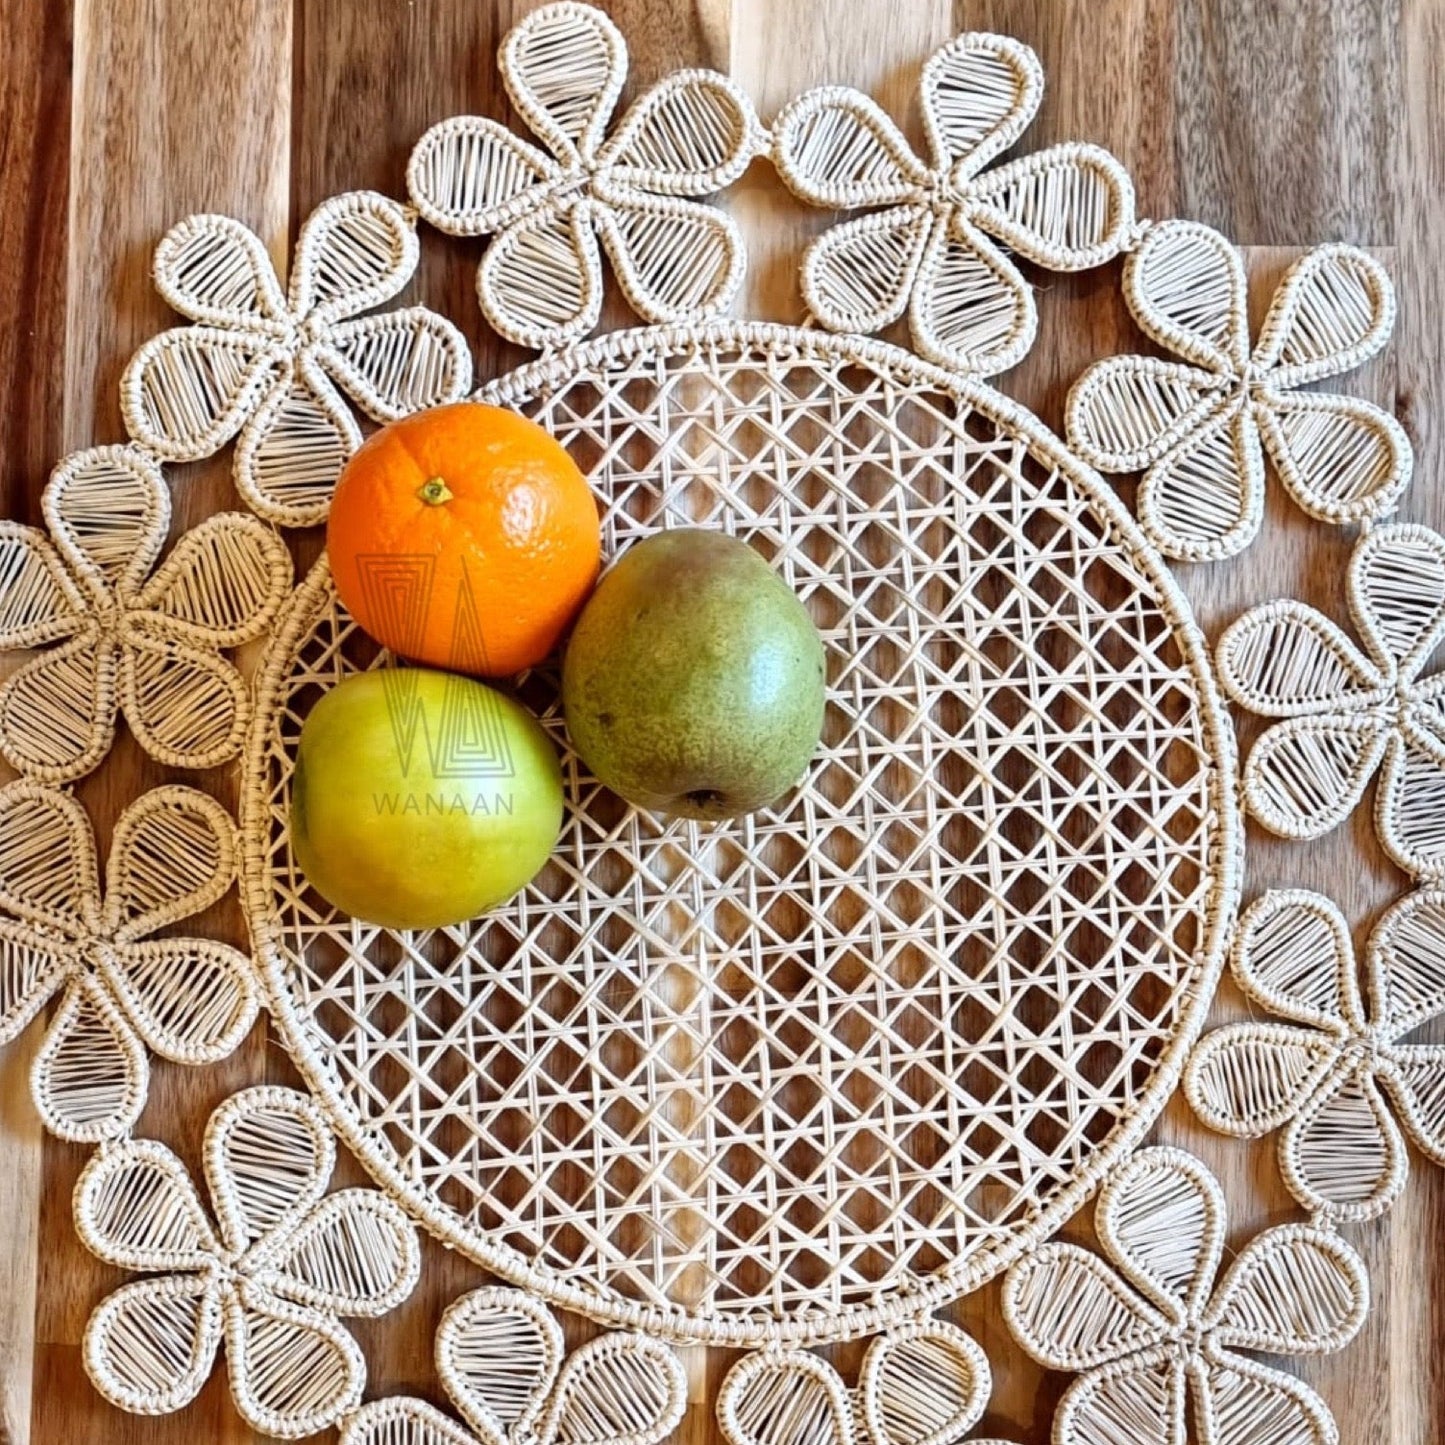 Lena Placemat Style, Handmade Iraca Palm Placemat, Table Decoration, Boho Table Setting from Colombia - Set of 4 or 6 Placemats